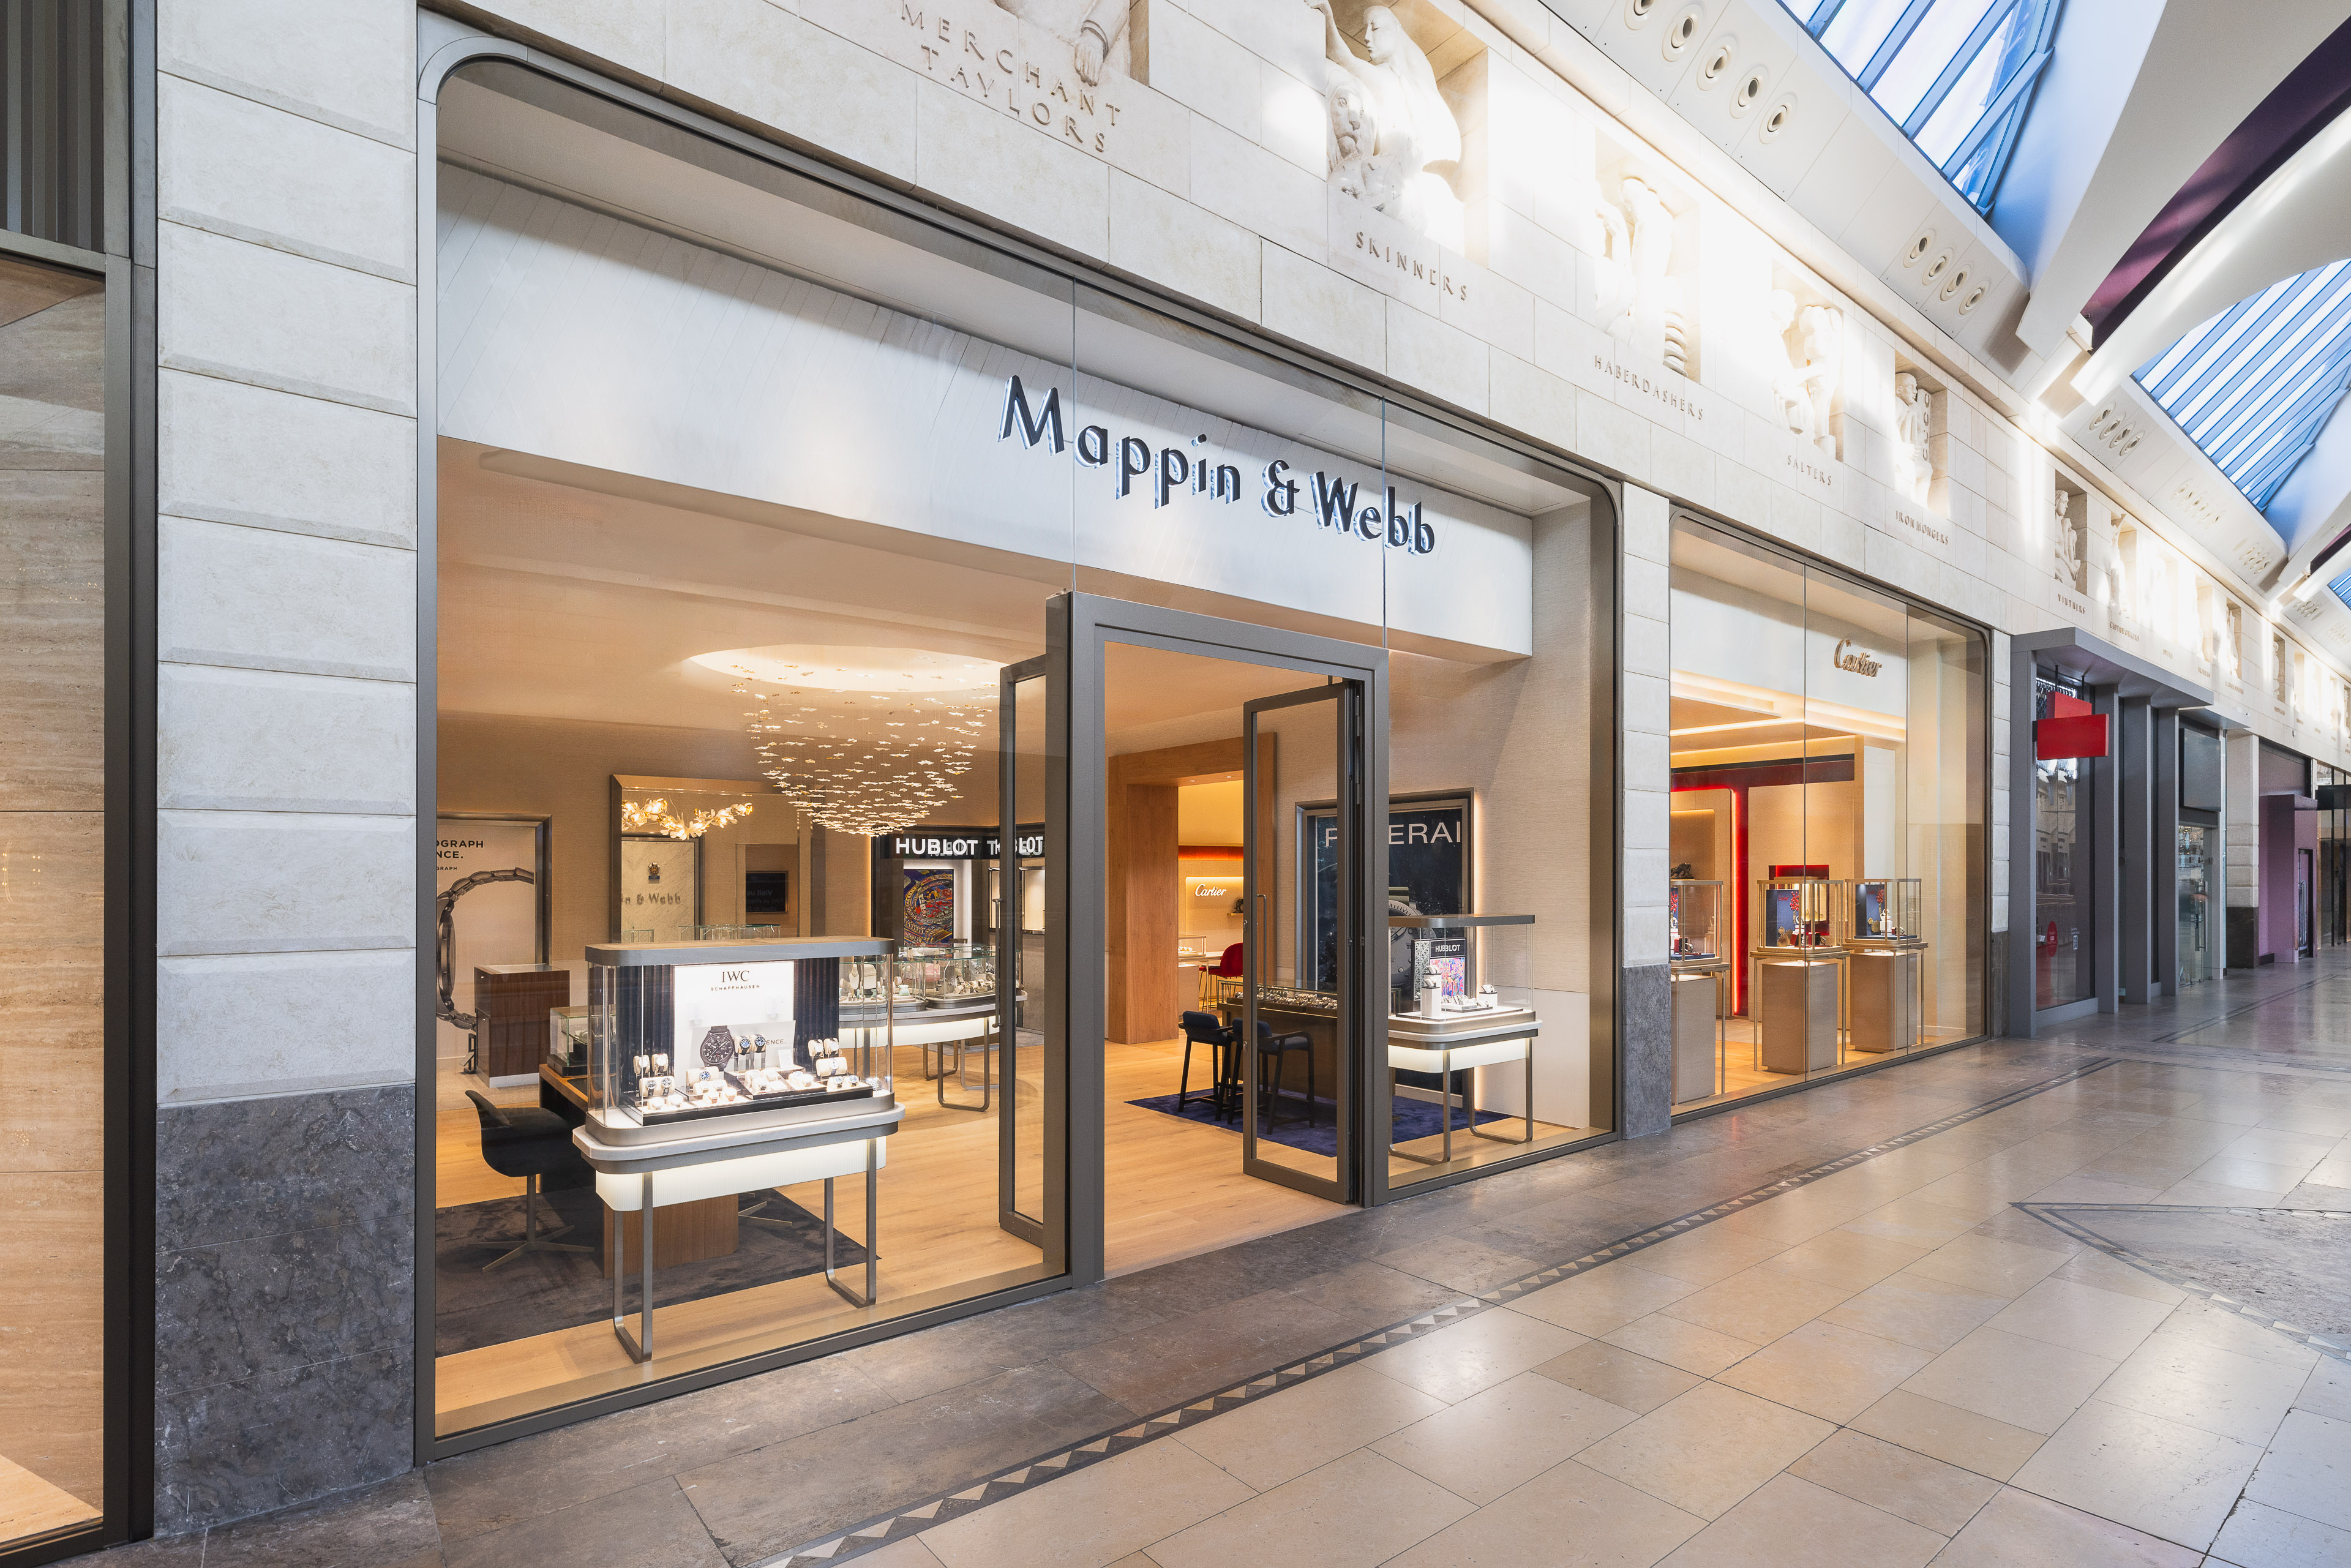 Mappin and Webb relocates and triples the size of its Bluewater